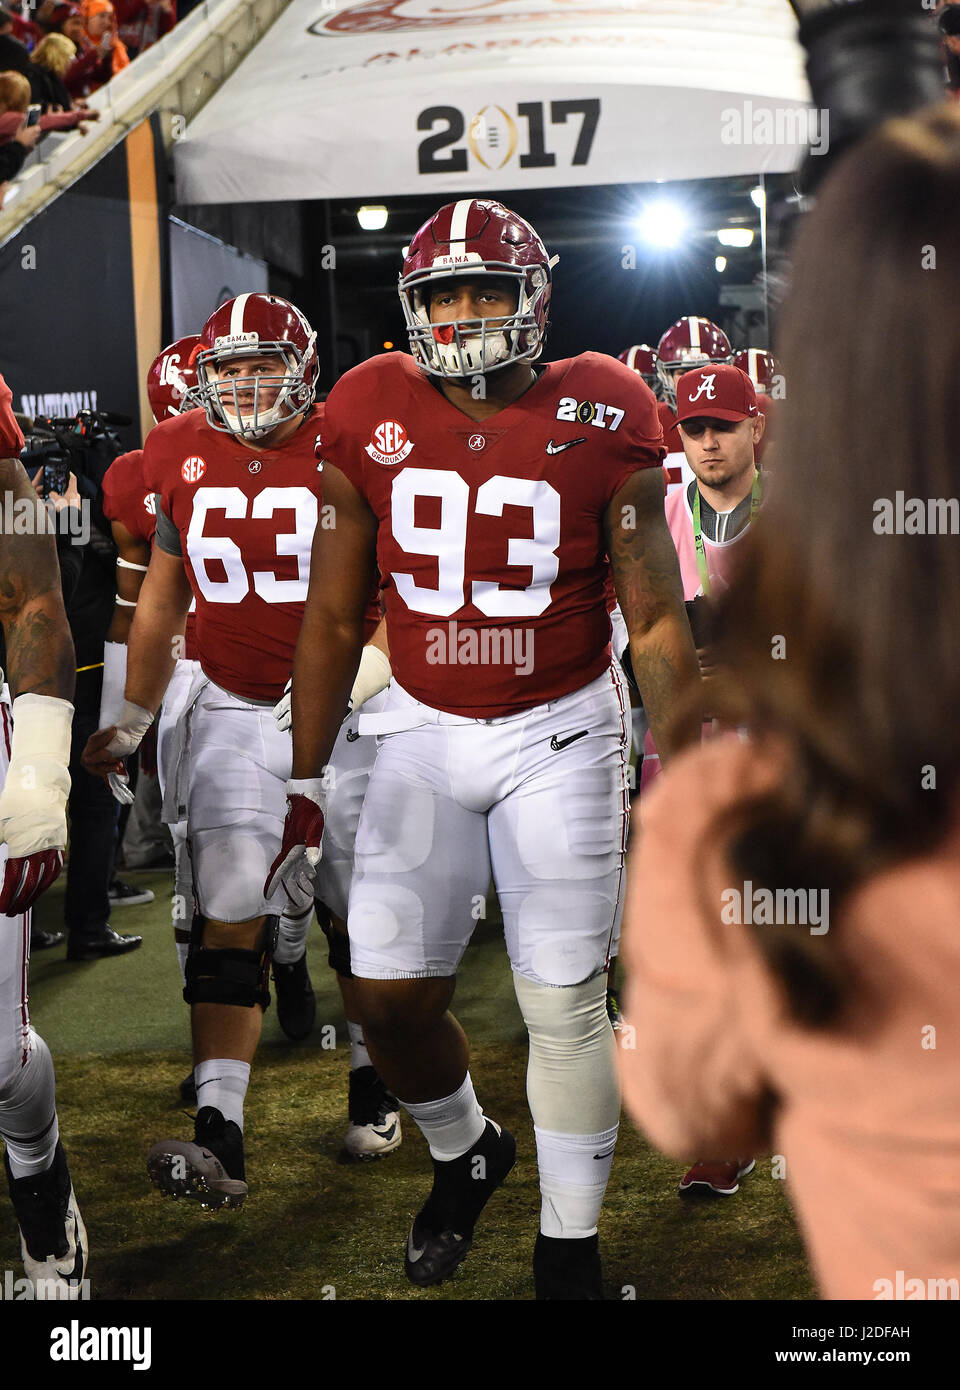 January, 9 2017 Tampa, FL.Alabama Crimson Tide defensive lineman (93) Jonathan Allen, and Offensive Lineman (63) J.C. Hassenauer enter the field during pre-game ceremonies during the National Championship college football game between the Clemson Tigers, and Alabama Crimson Tide, on January 9, 2017. The Clemson Tigers beat the Alabama Crimson Tide 35-31 at Raymond James Stadium for the National Title, in Tampa, FL. (Absolute Complete Photographer & Company Credit: Jose/MarinMedia.org/Cal Sport Media) (Network Television please contact your Sales Representative for Television usage.) (Tel Stock Photo